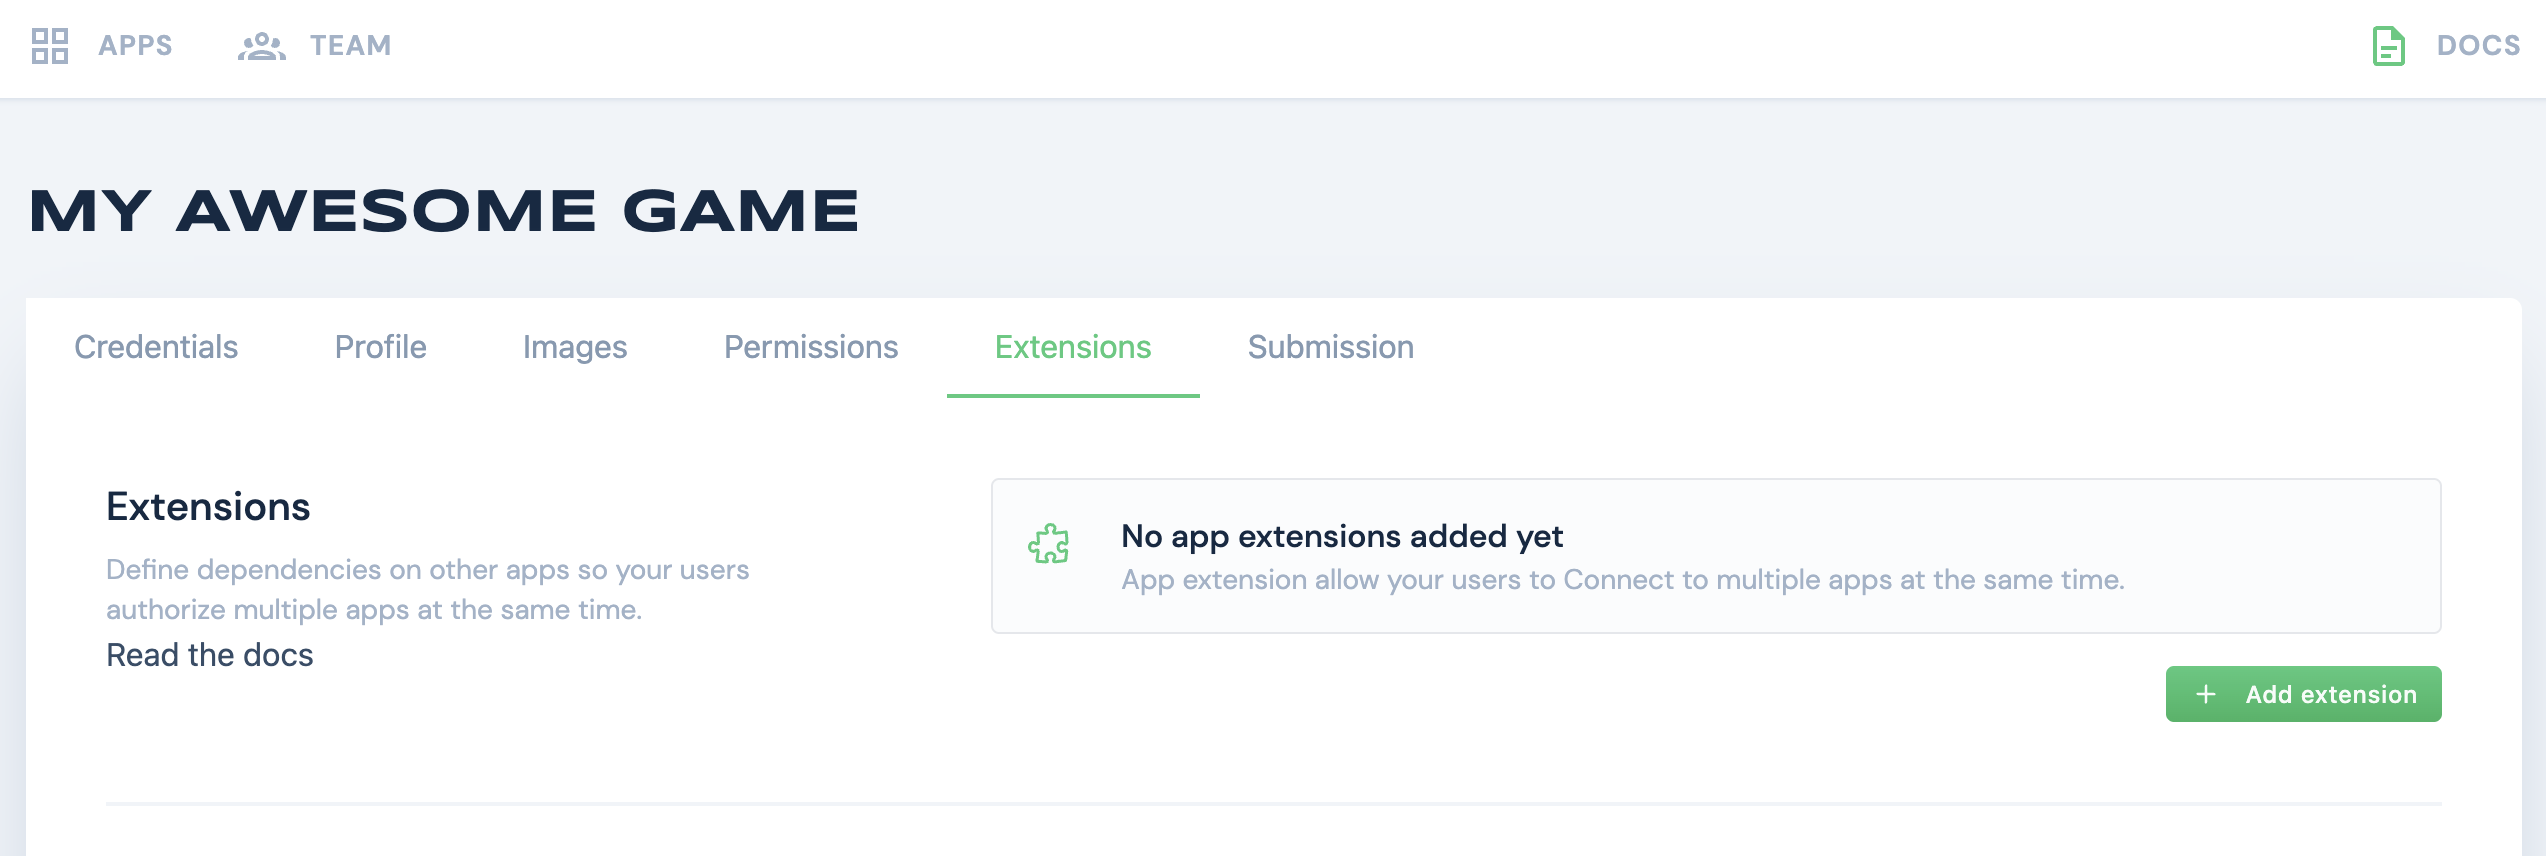 Extensions section preview from the dashboard.